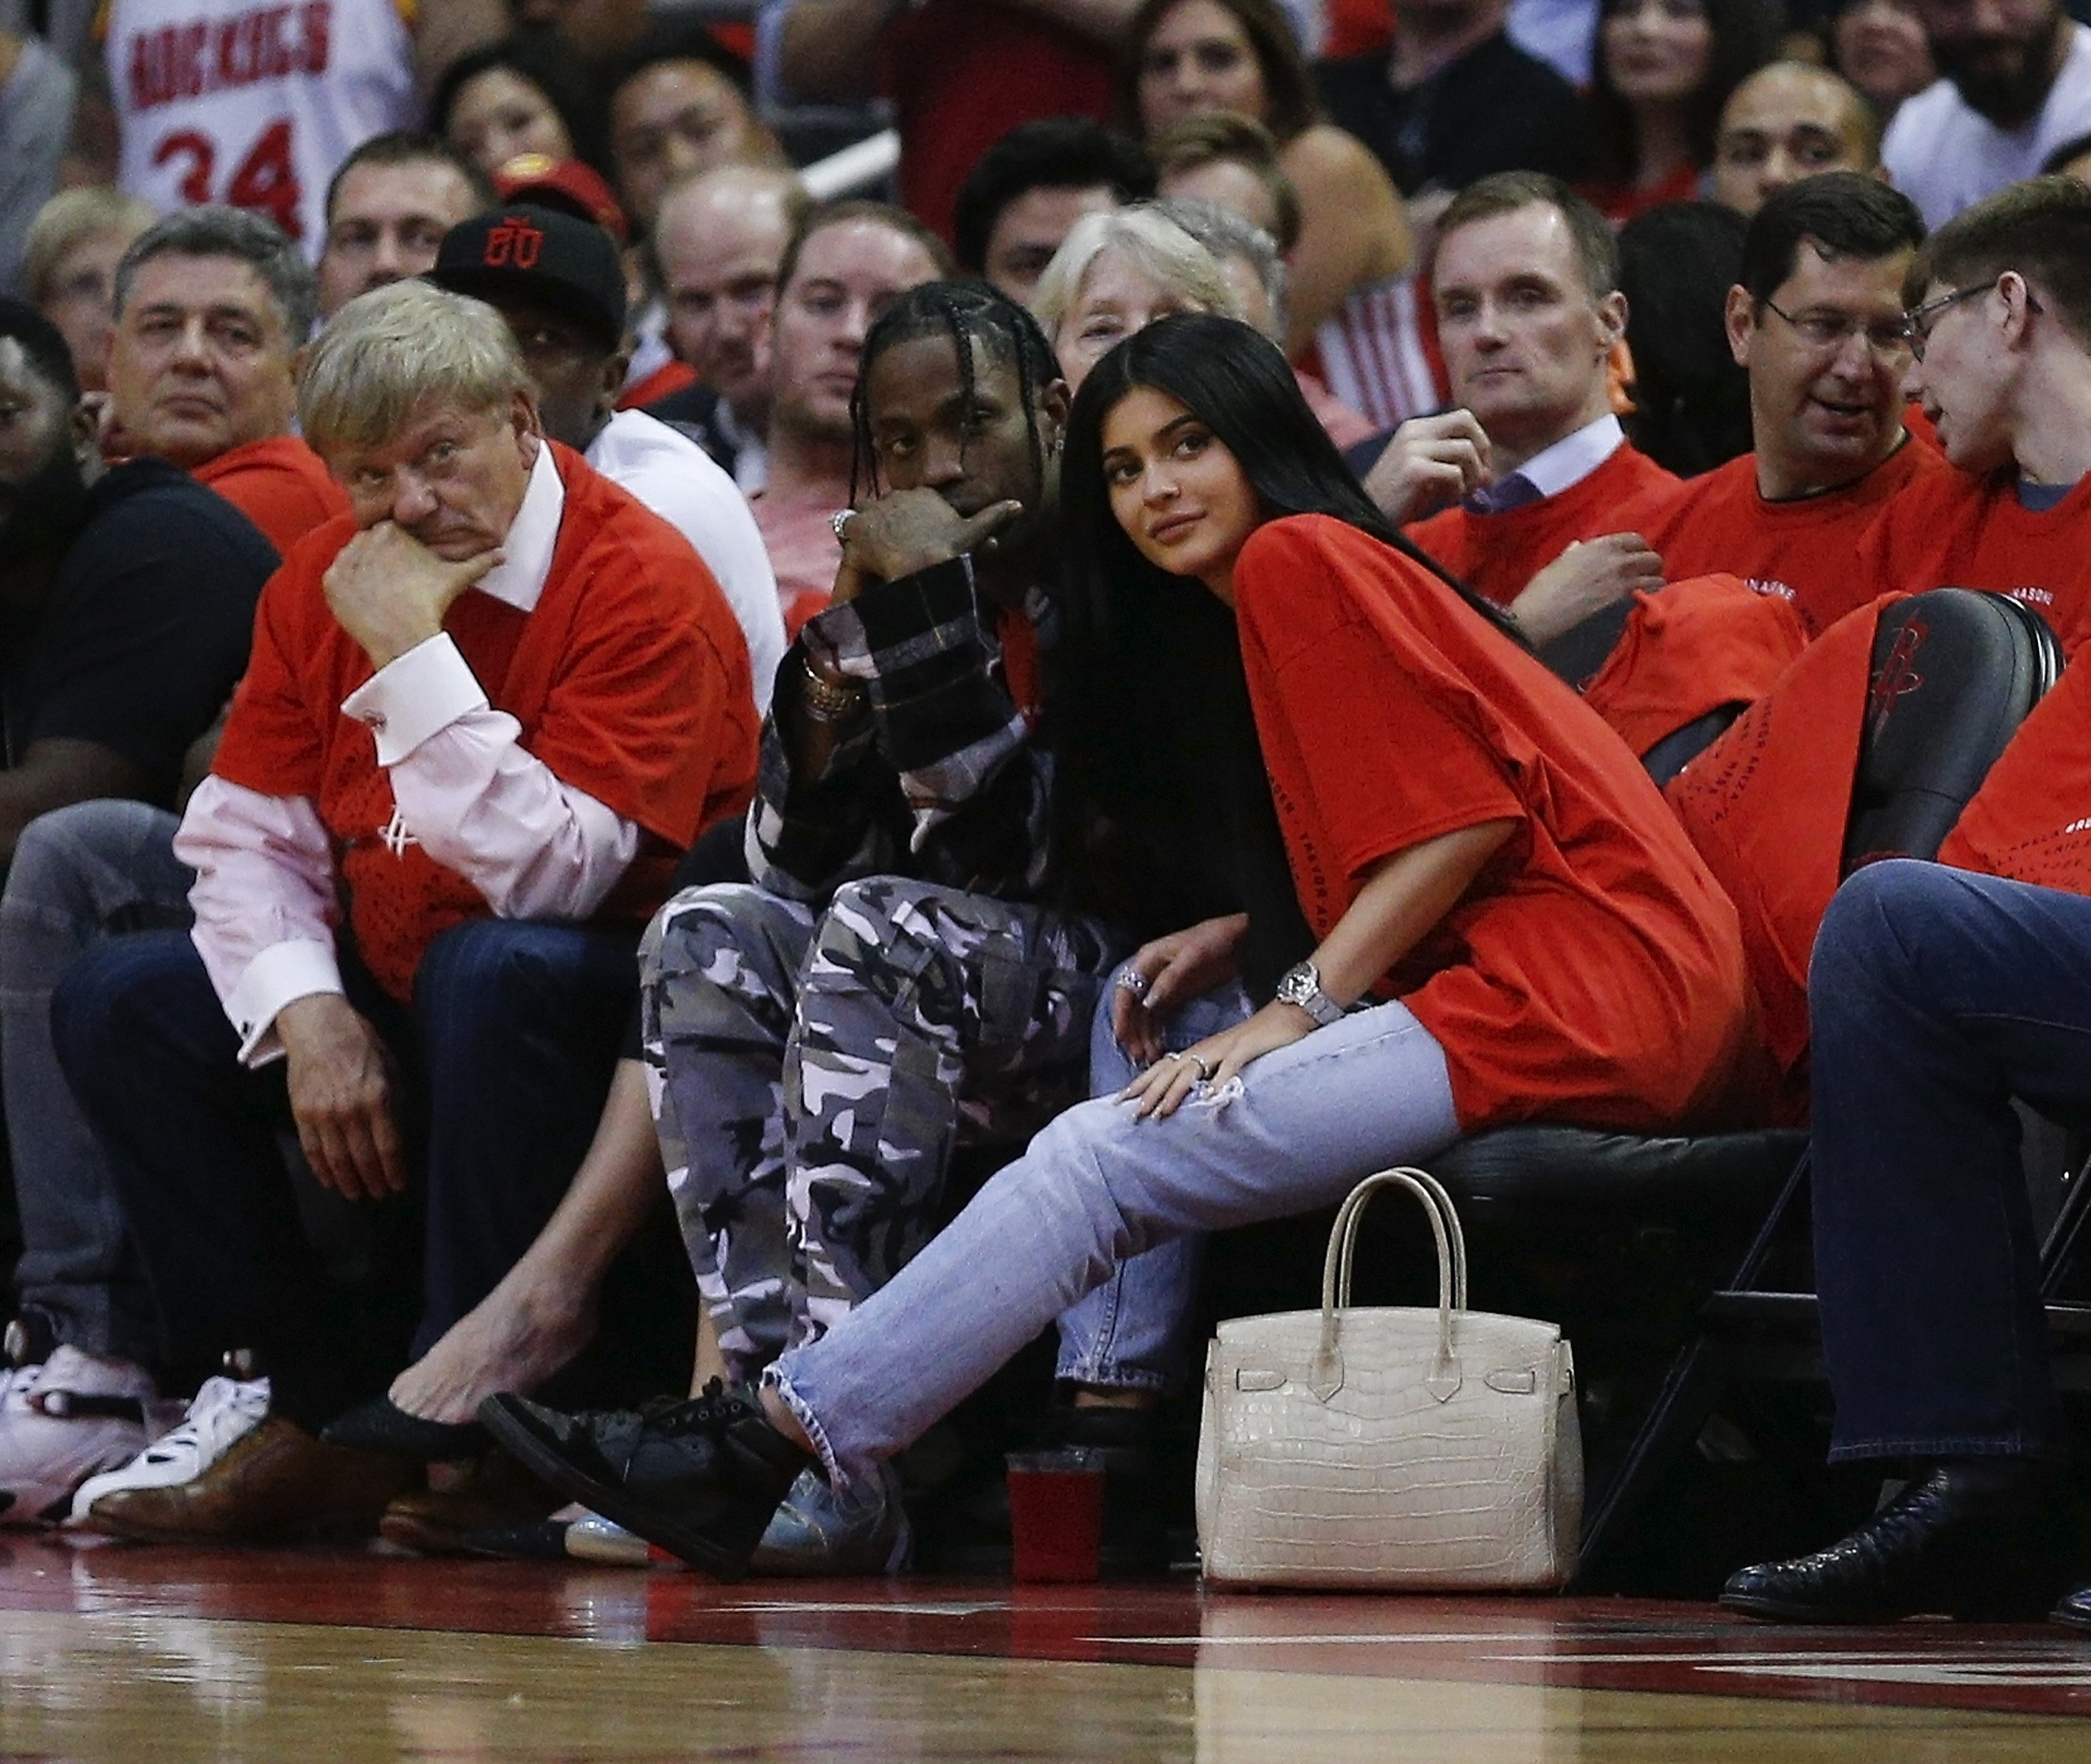 Travis Scott and Kylie Jenner watch courtside during Game Five of the Western Conference Quarterfinals game of the 2017 NBA Playoffs on April 25, 2017 in Houston